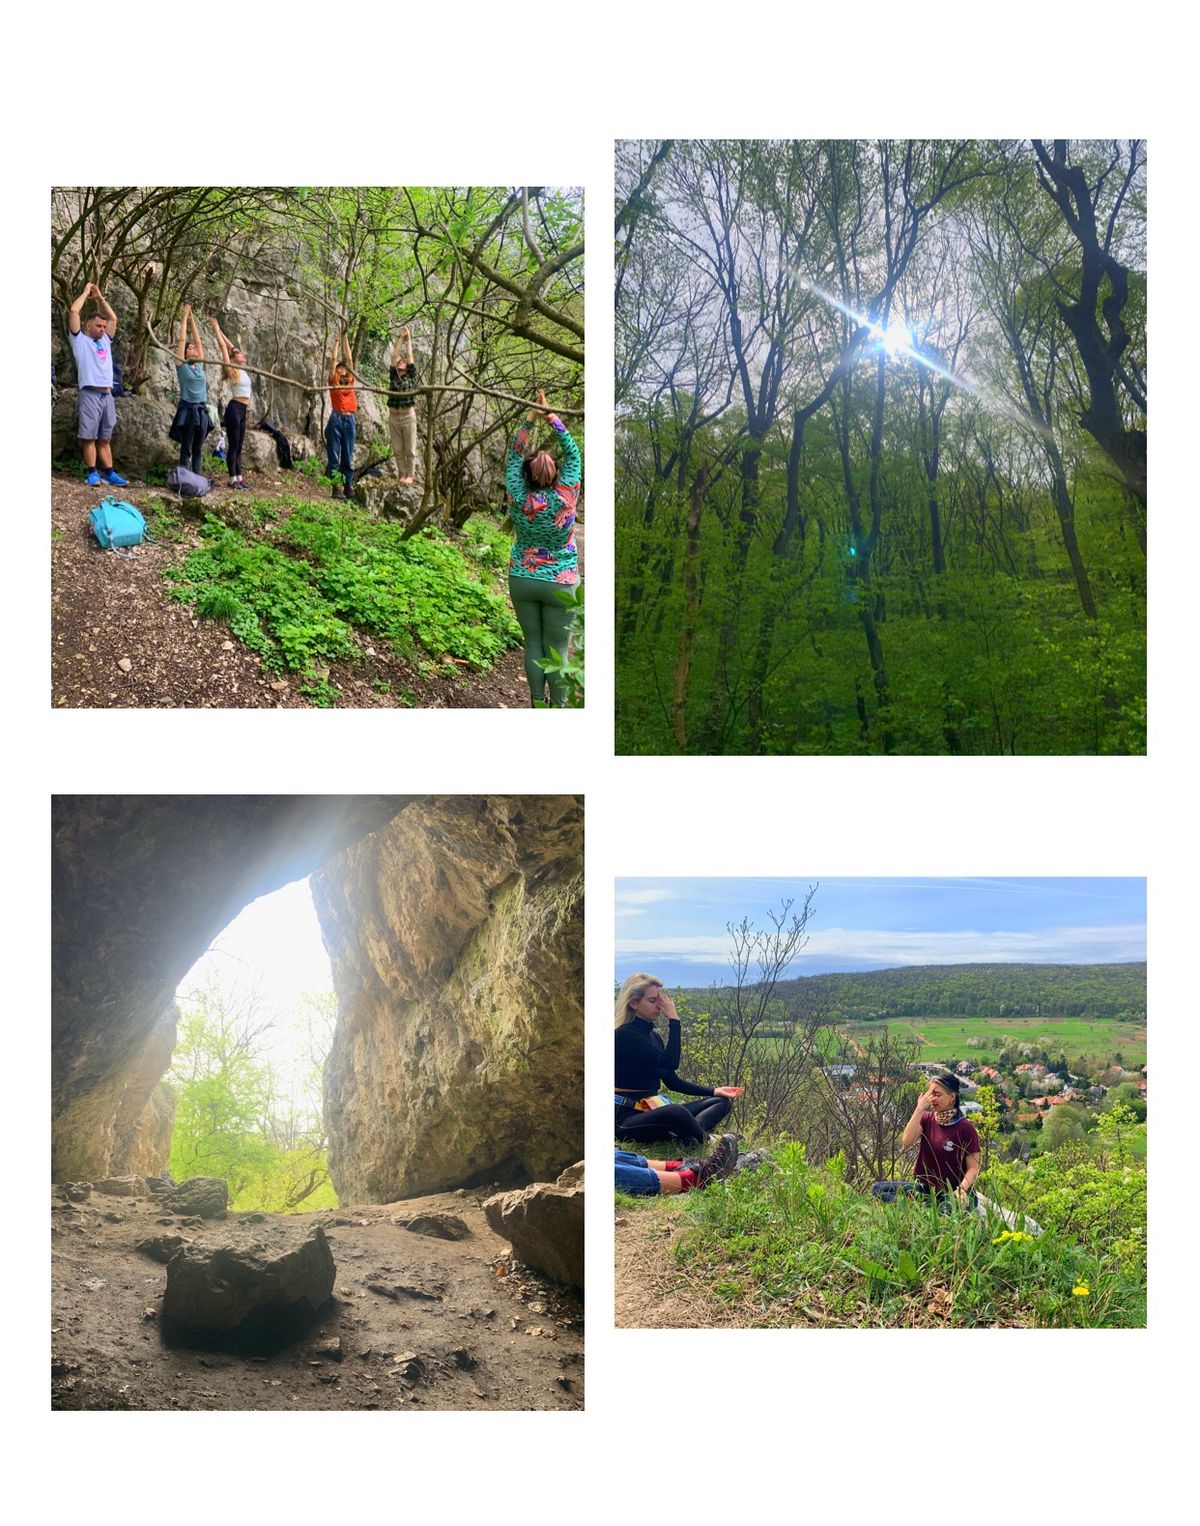 Hike & light yoga in Remete-szurdok - Love Mother Earth - raincheck Moved to May 1